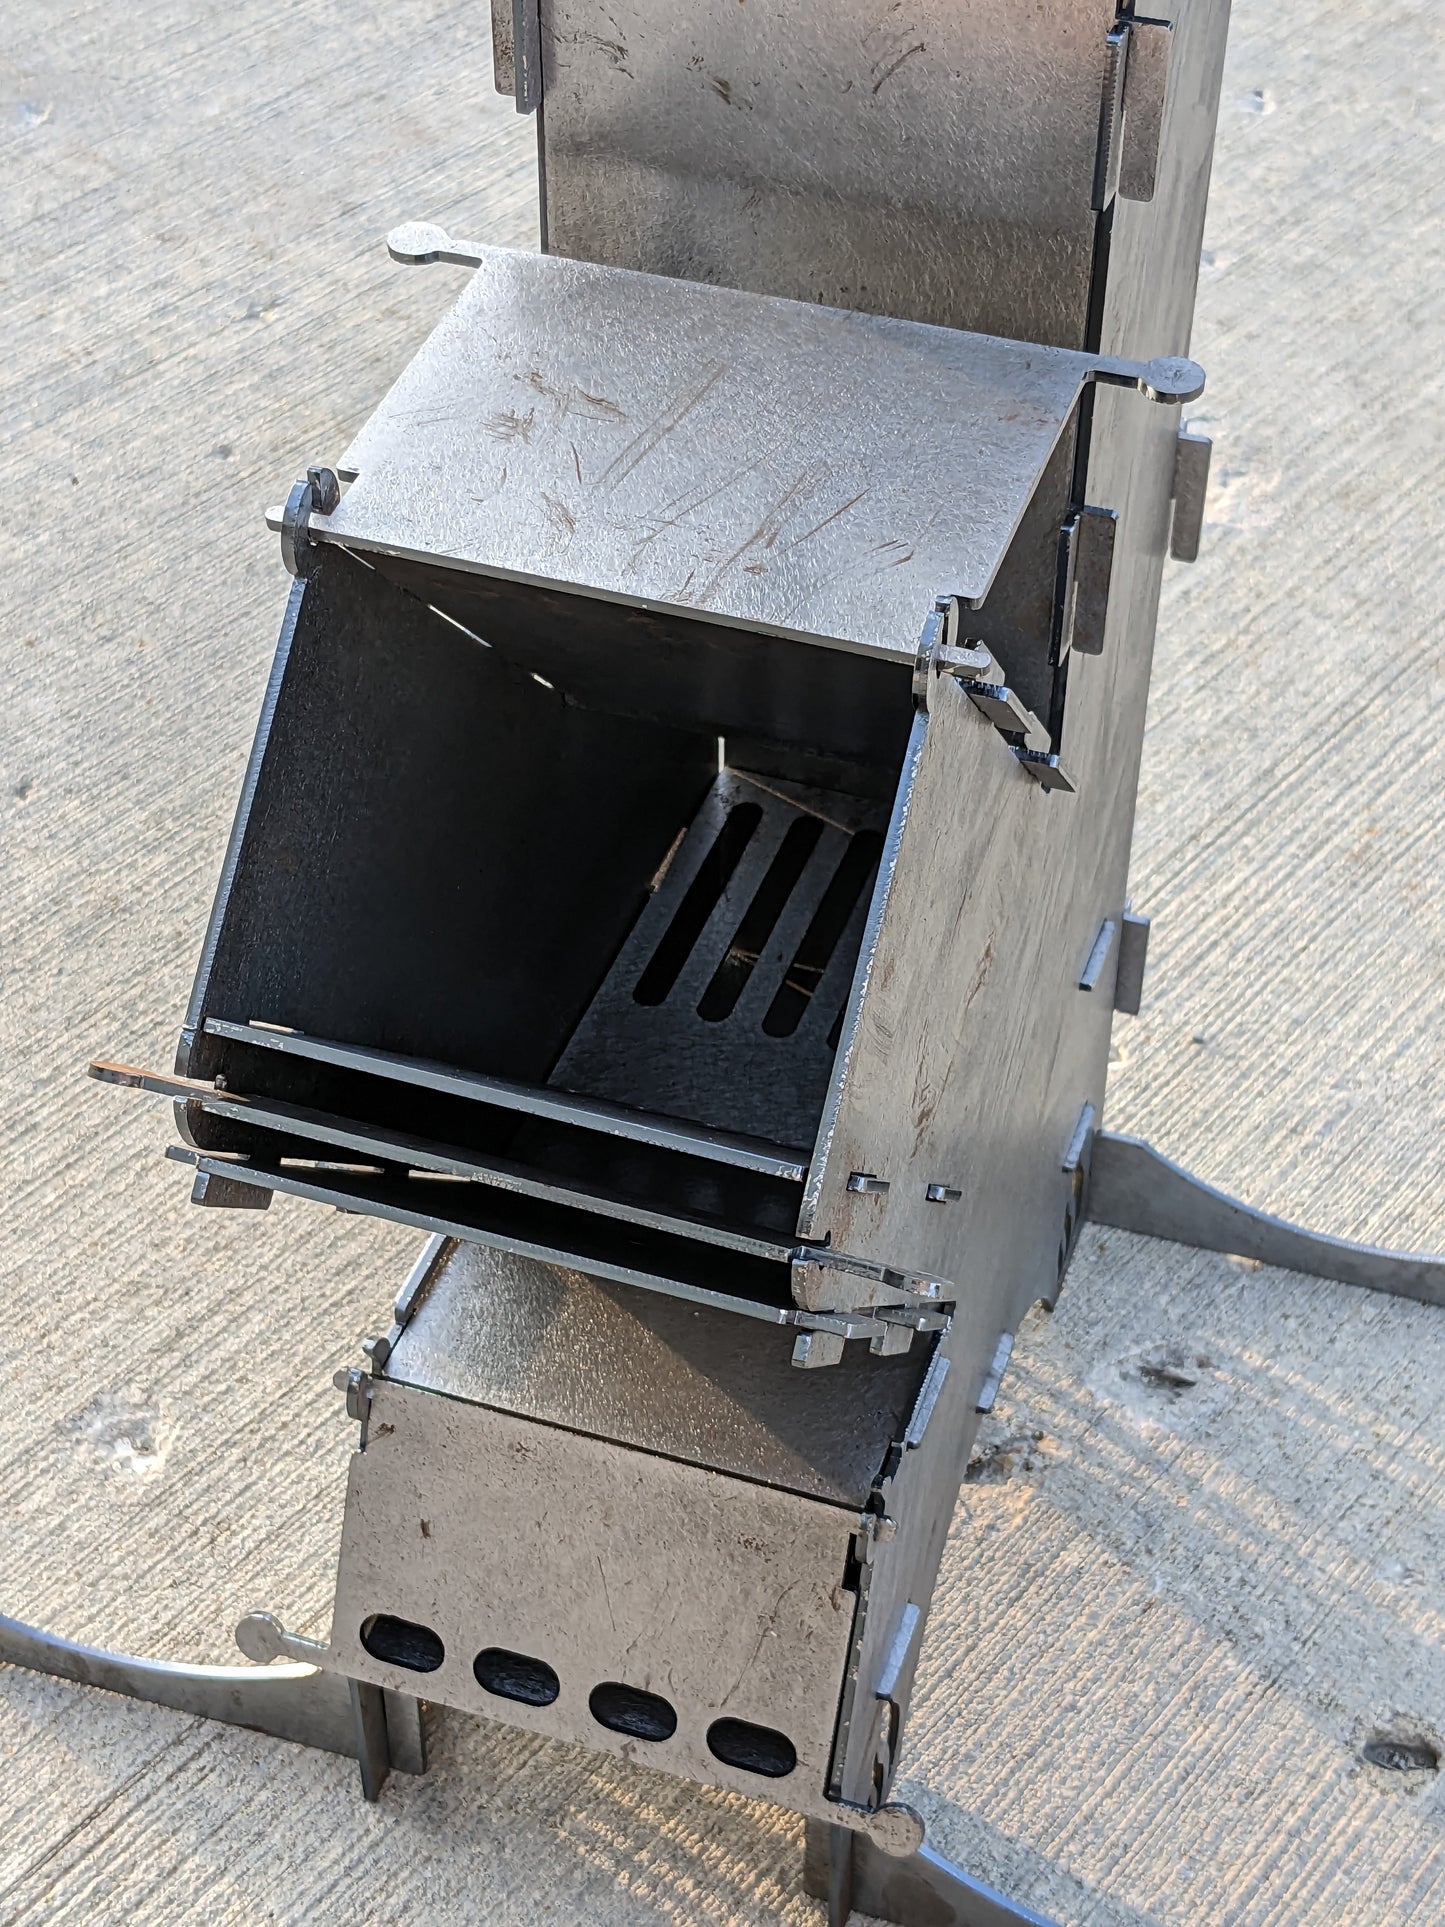 Collapsible Rocket Stove